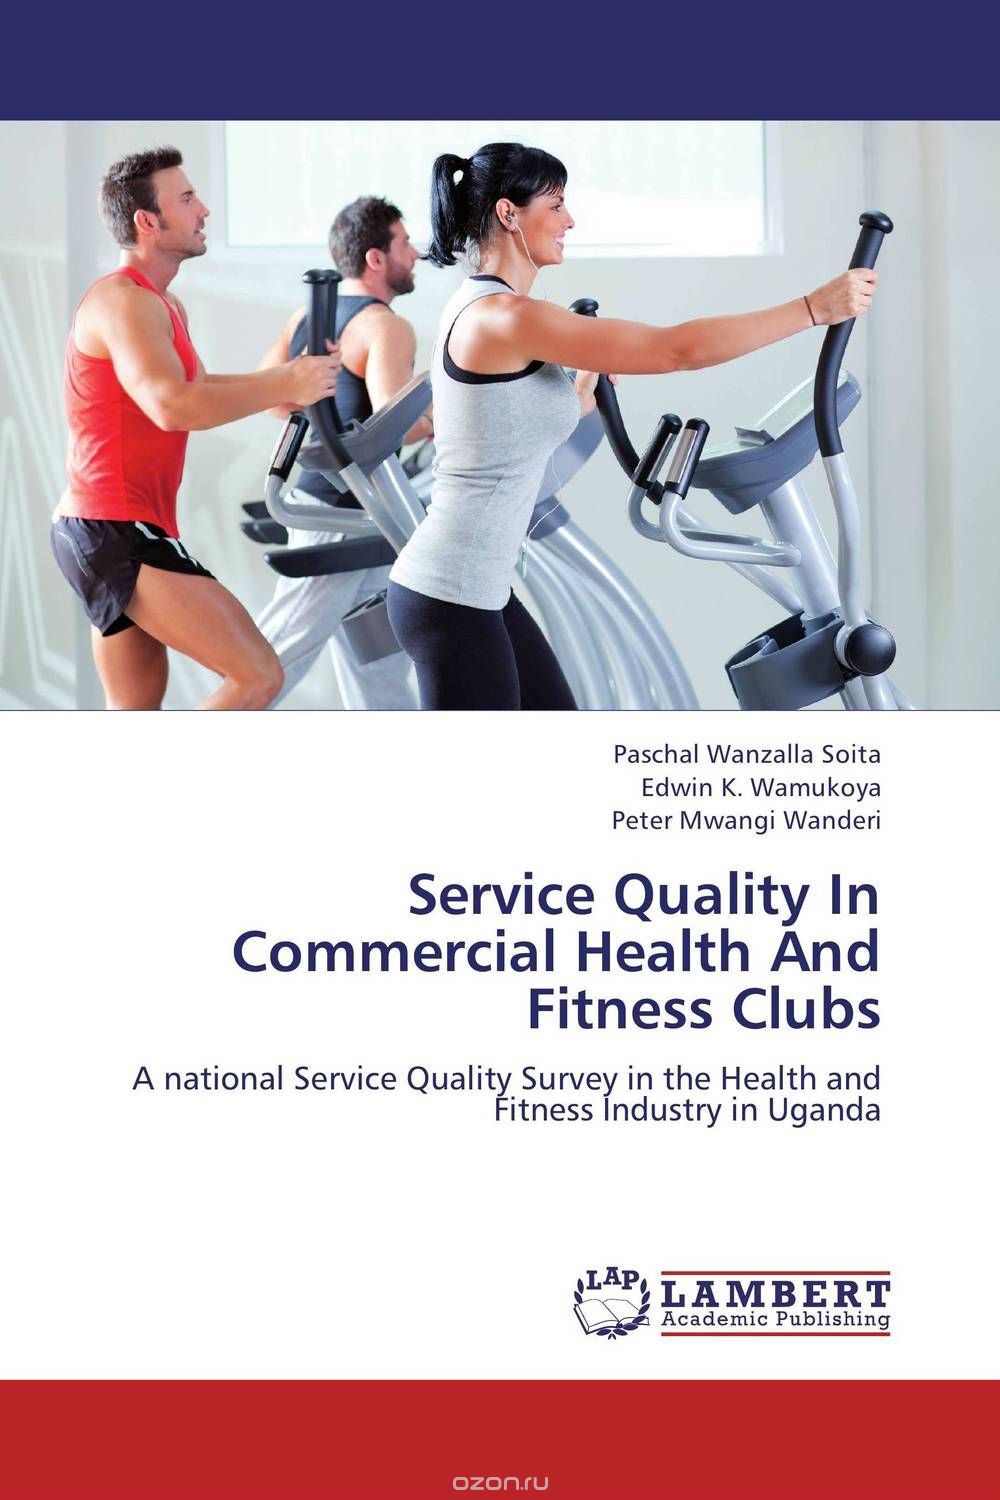 Скачать книгу "Service Quality In Commercial Health And Fitness Clubs"